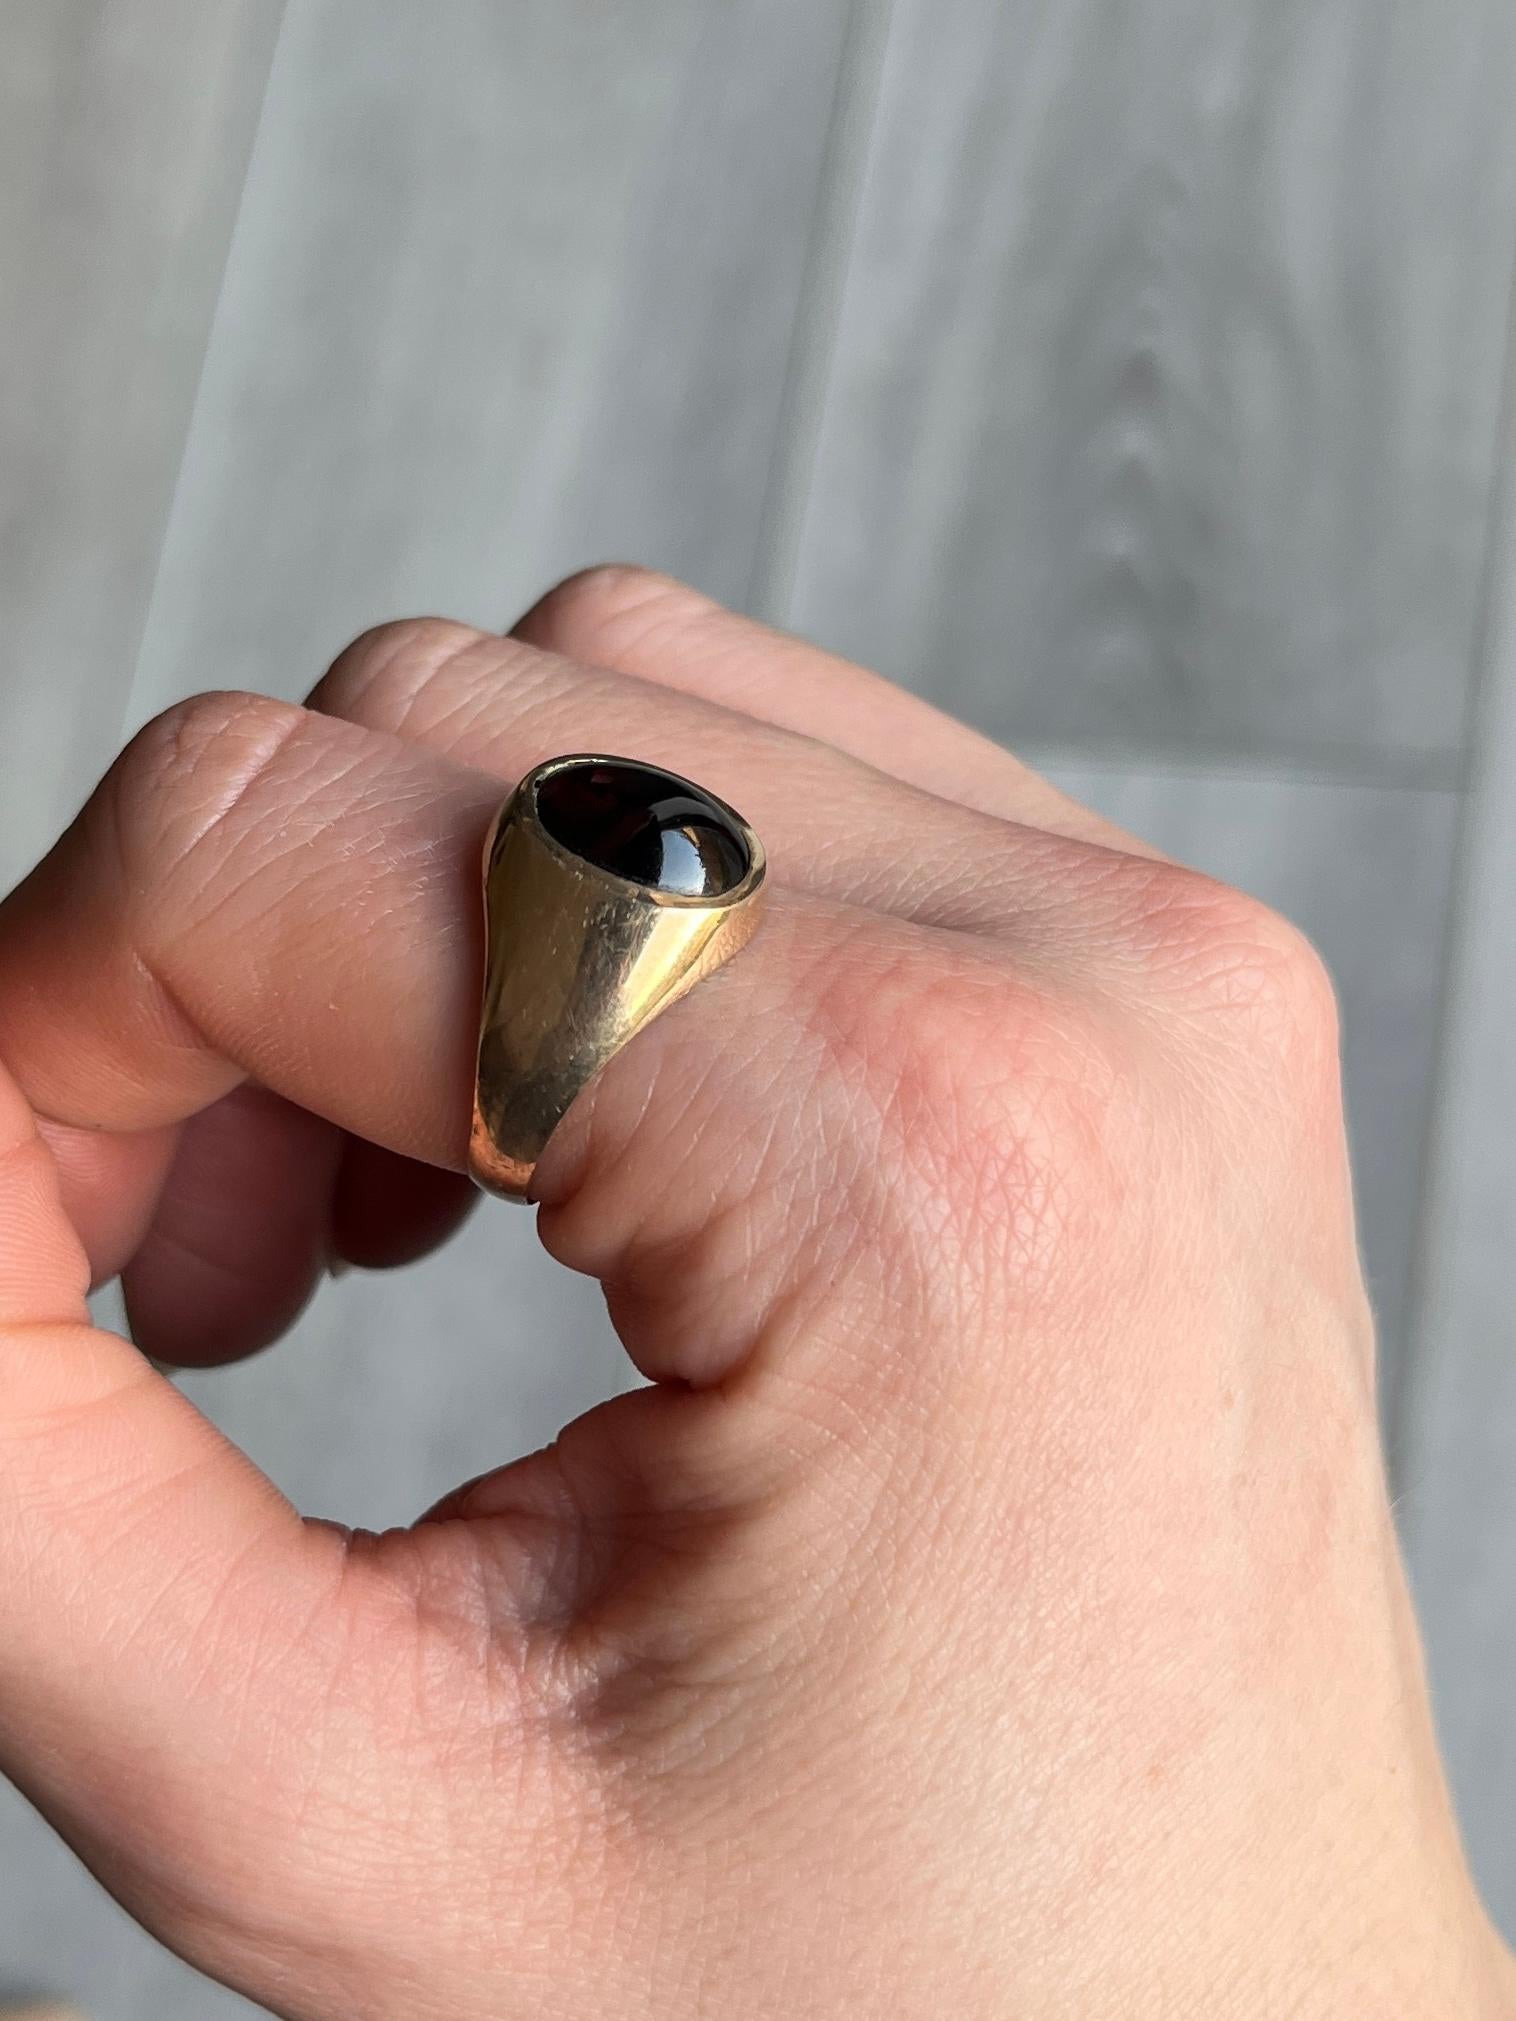 Sat proud upon a gorgeous glossy 9ct yellow gold band is an equally glossy garnet cabochon stone. The stone nearly spans the whole width of this ring. Made in London 1978, England.

Ring Size: U or 10
Band Width At Widest: 14mm

Weight: 3.4g